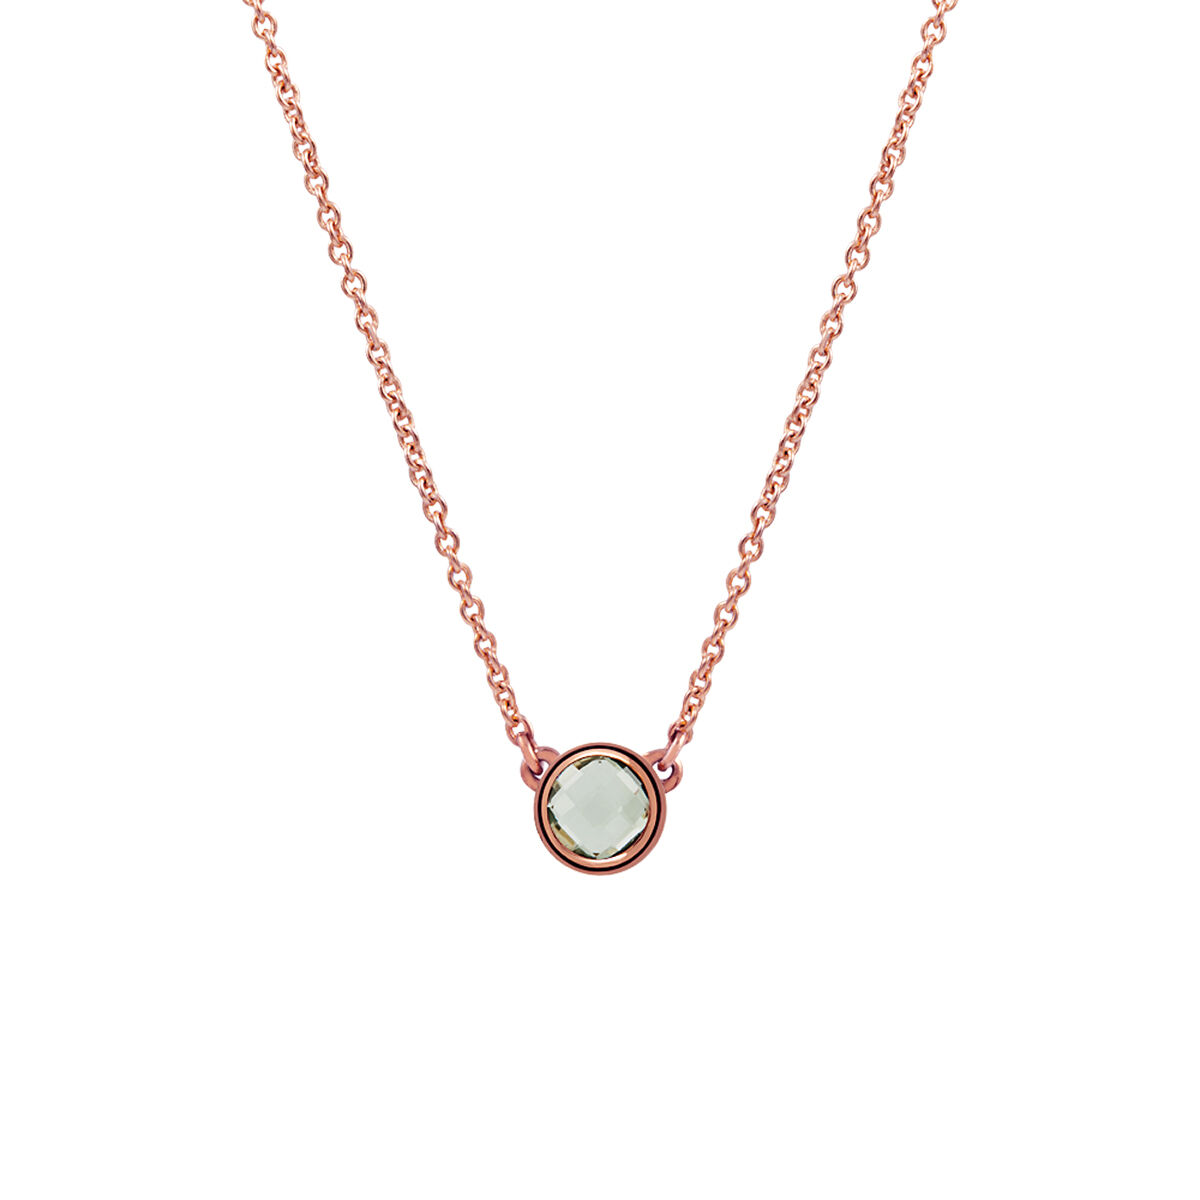 Rose gold plated chaton round quartz necklace , J00966-03-GQ, hi-res